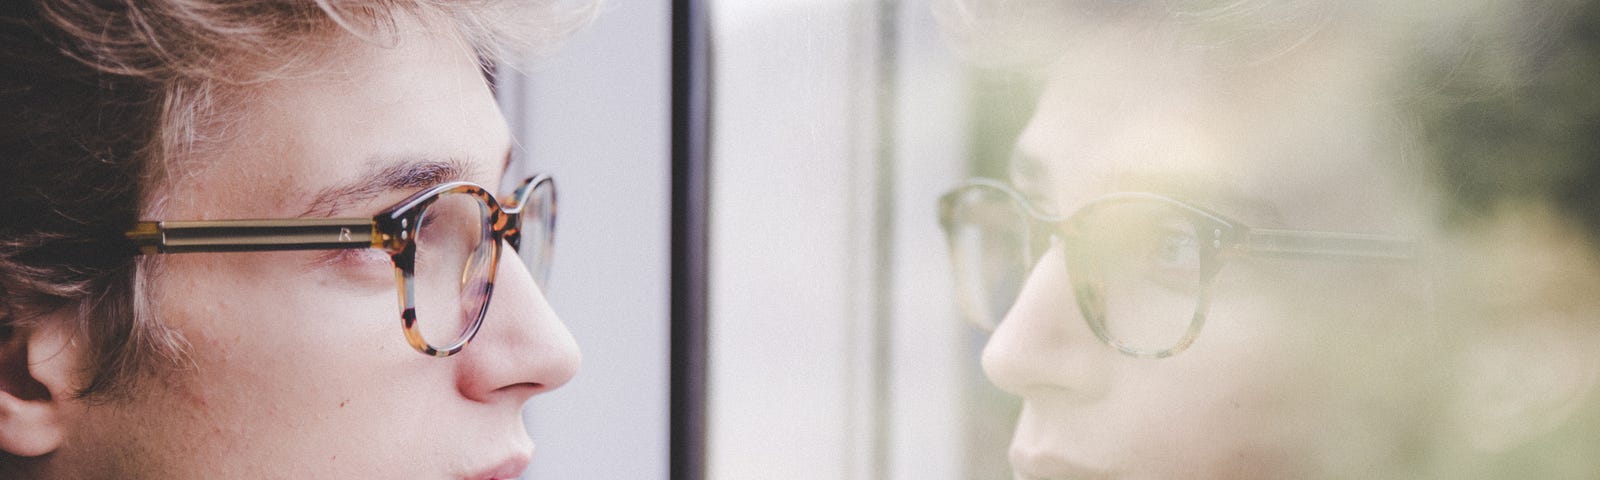 Young man with glasses looking contemplativly at his reflection.